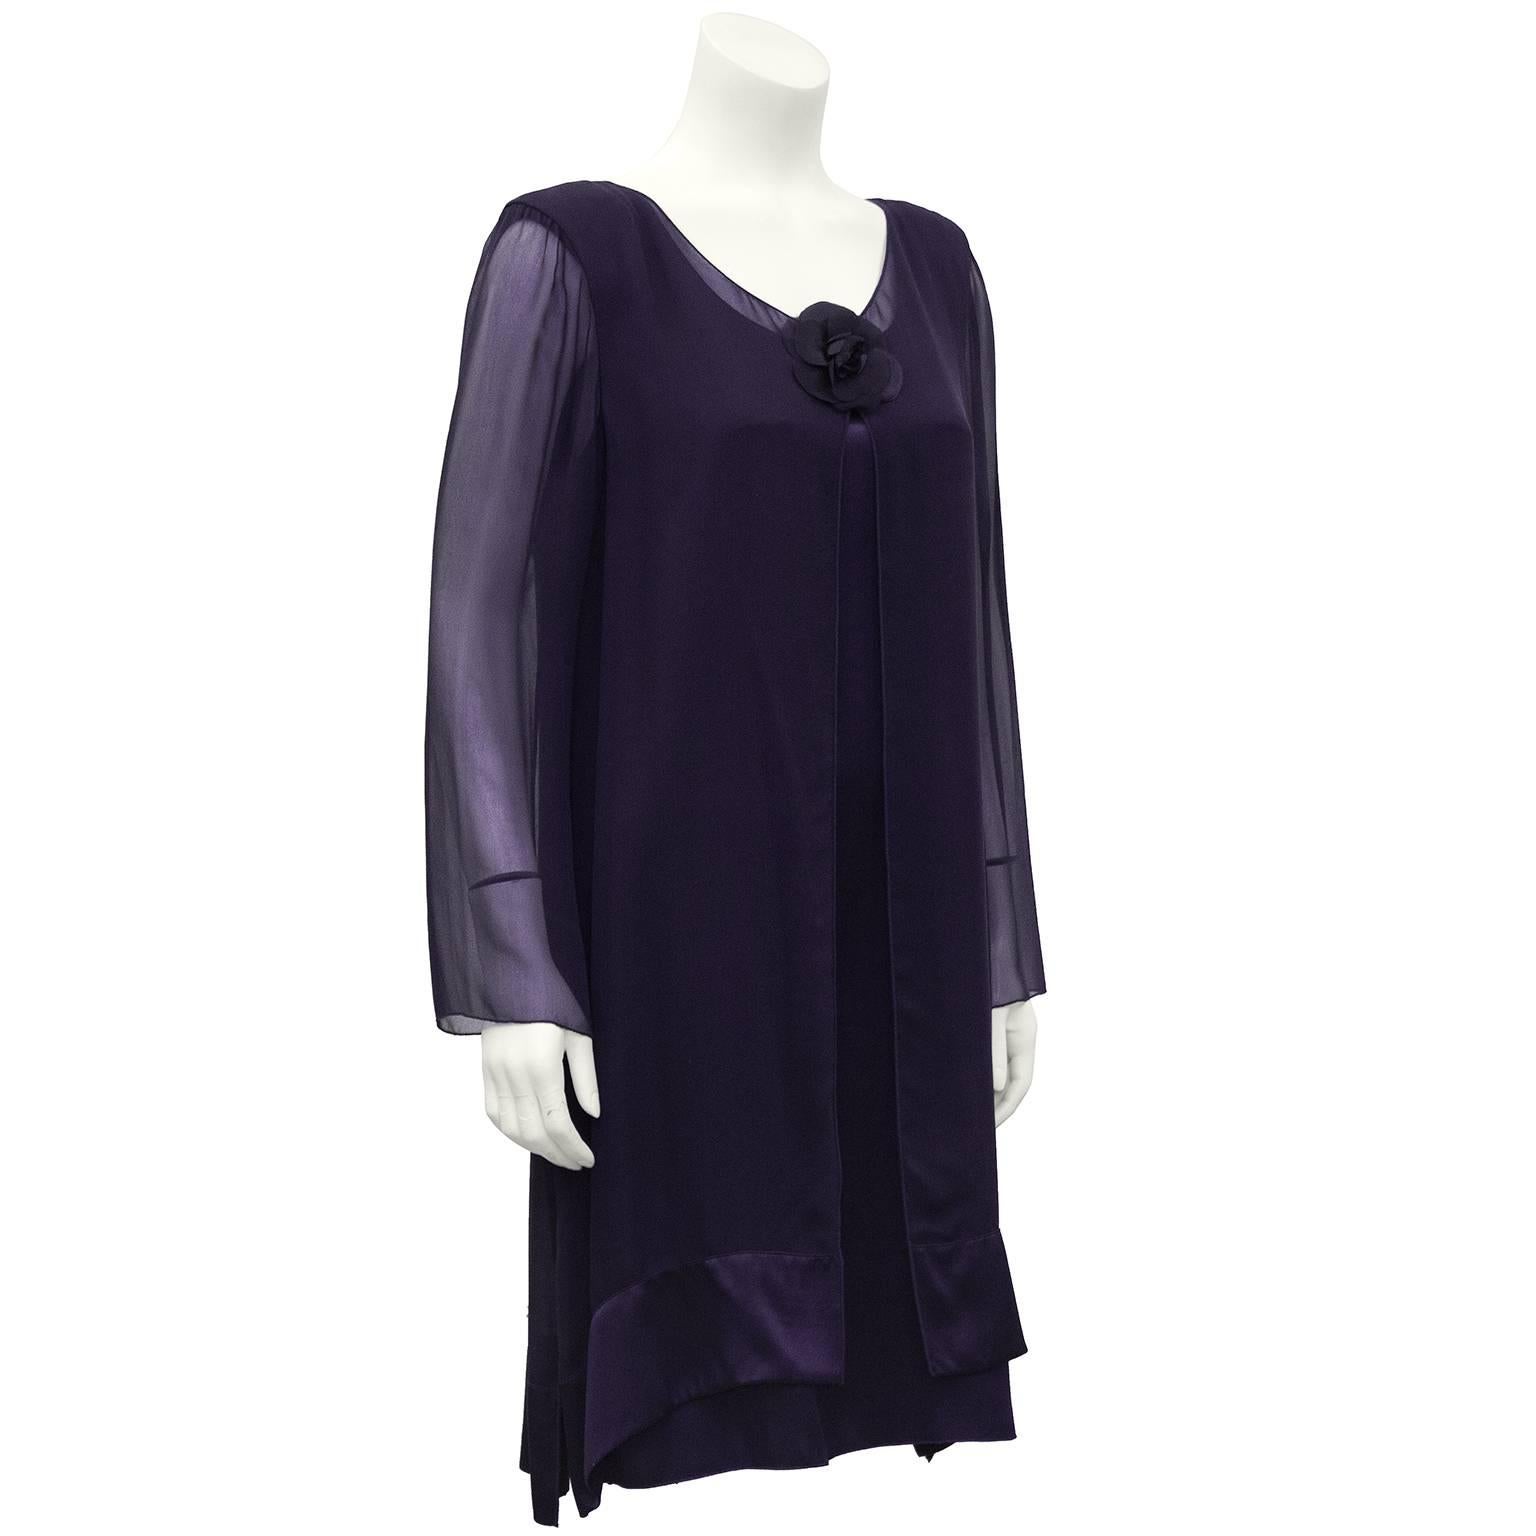 1980's Holly Harp deep purple long sleeve chiffon overlay swing style dinner dress with satin gardenia at the neck and satin banding around the hem. Elegant sleeveless under-dress. Fits like a US 8-10. In excellent condition.

Sleeve 18